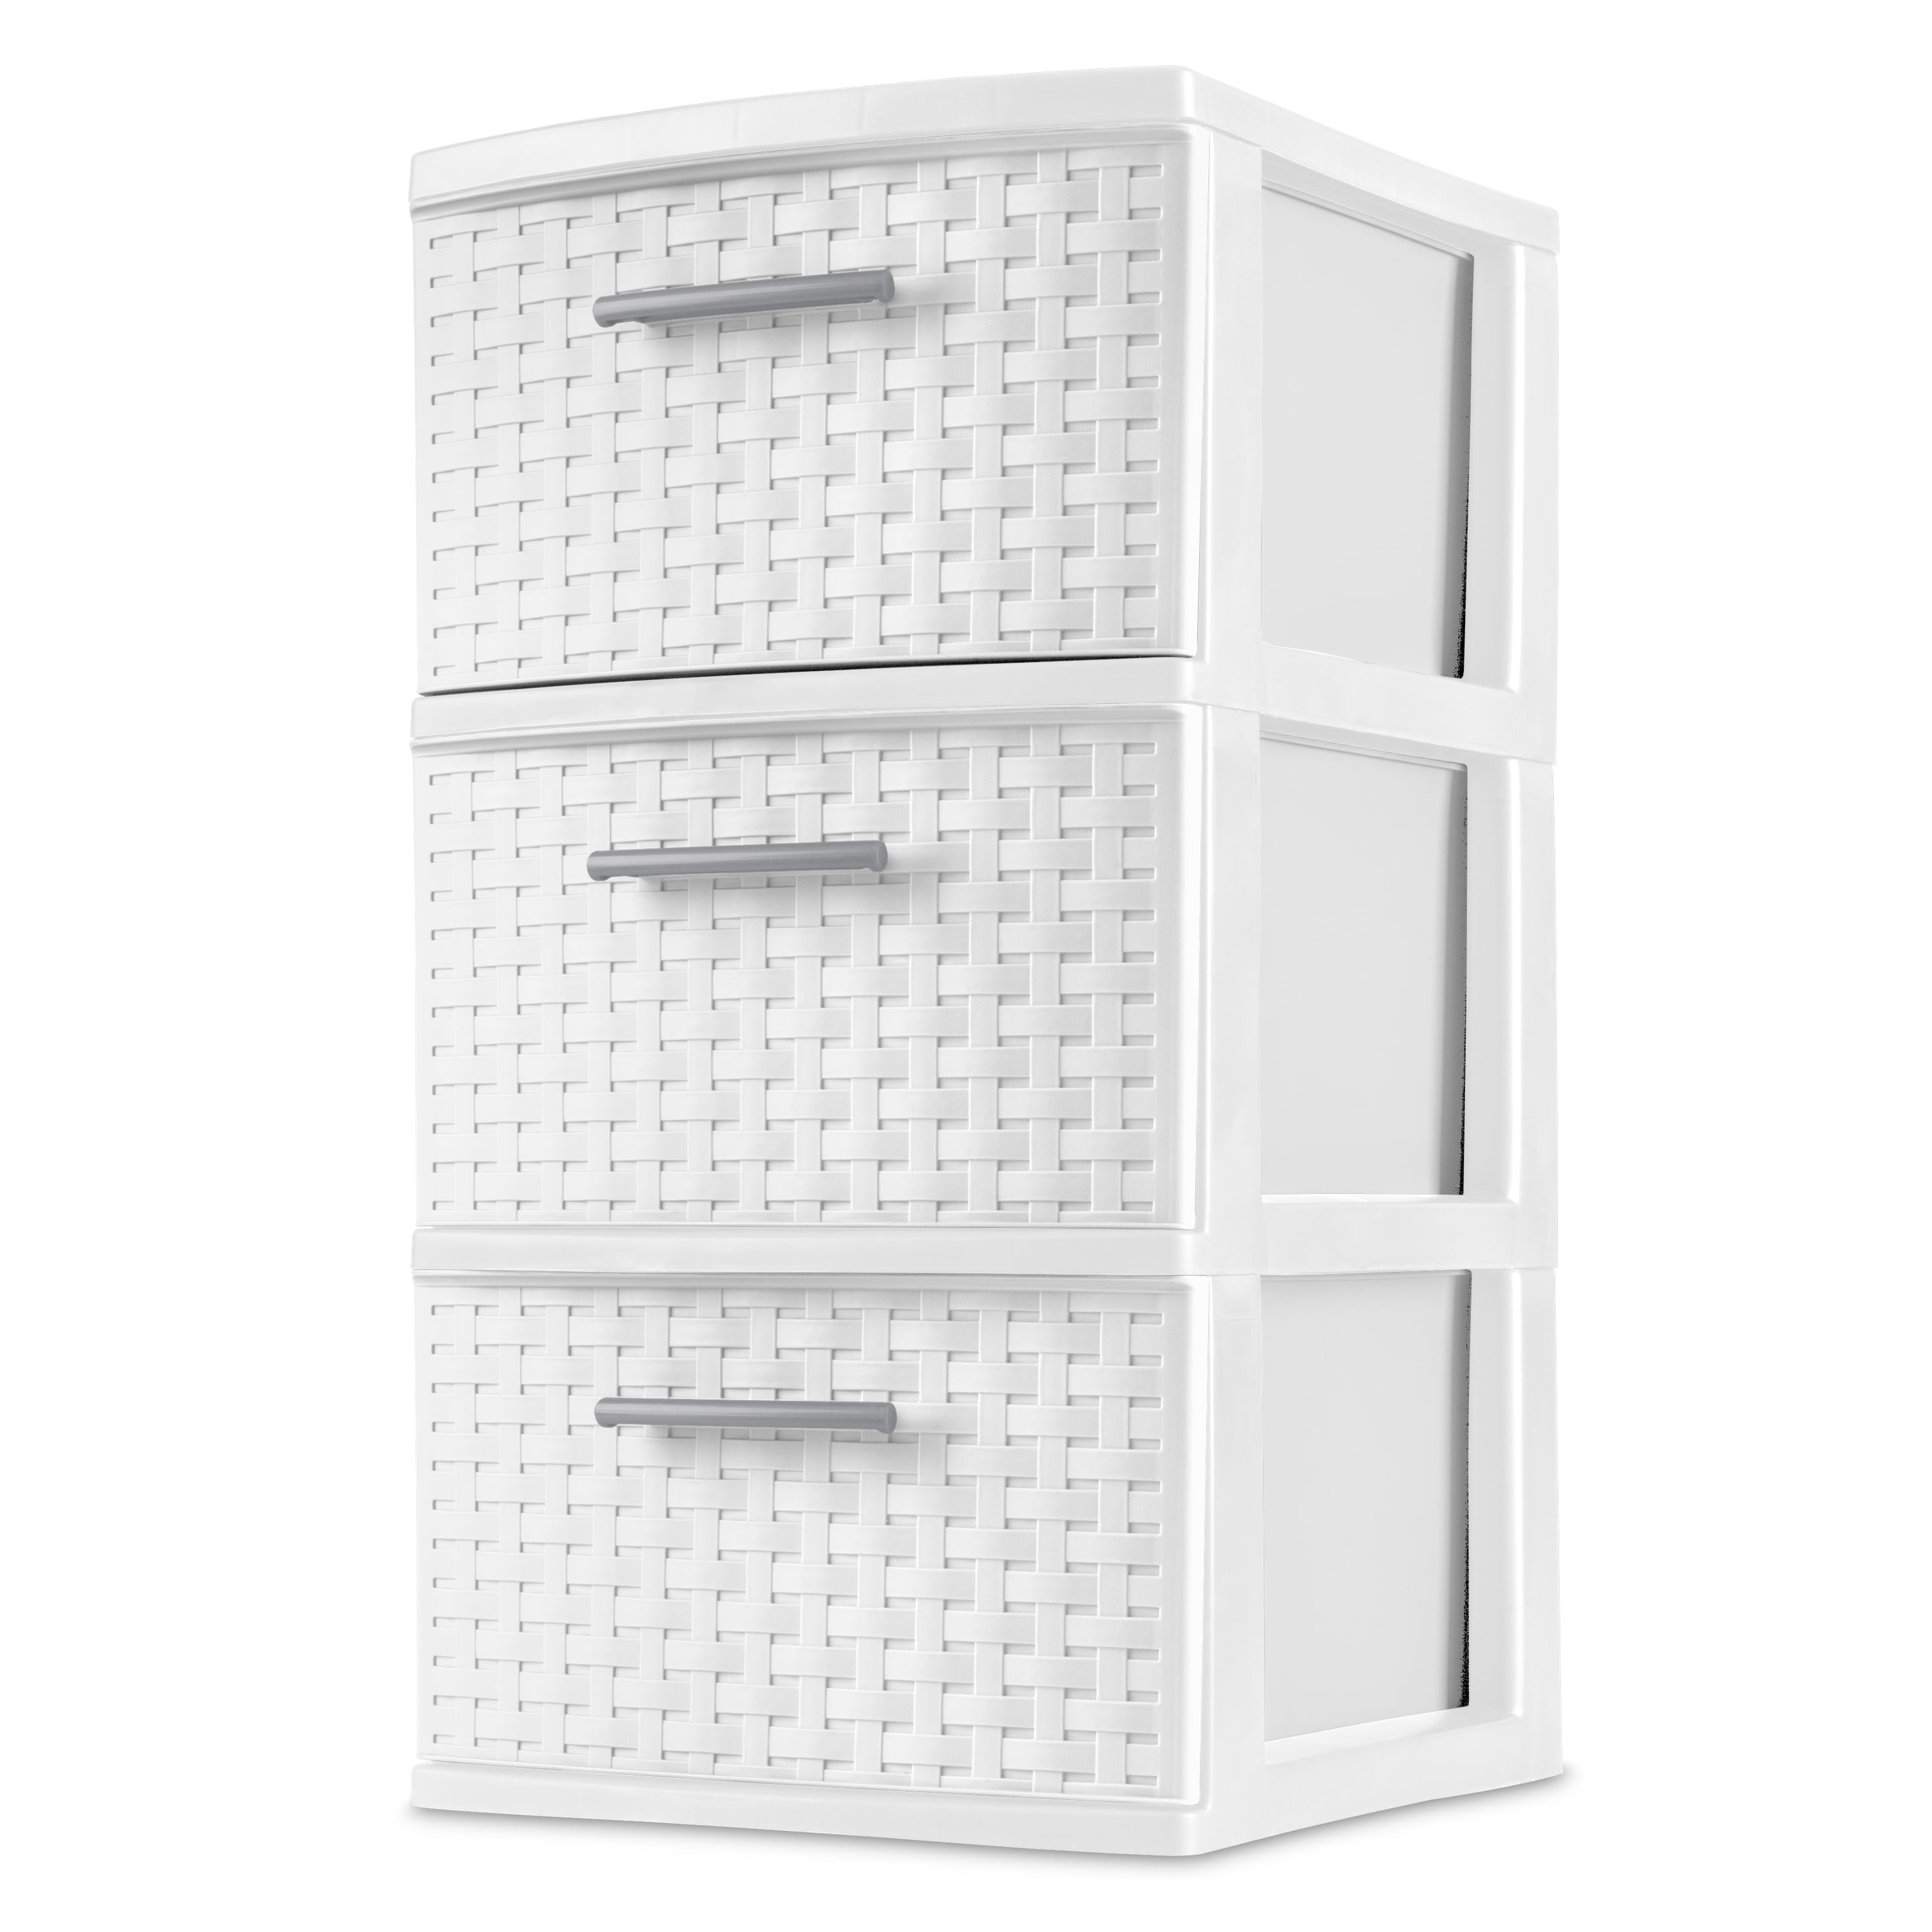 Found these Sterilite 3 drawer units at Walmart for $8.23 a piece